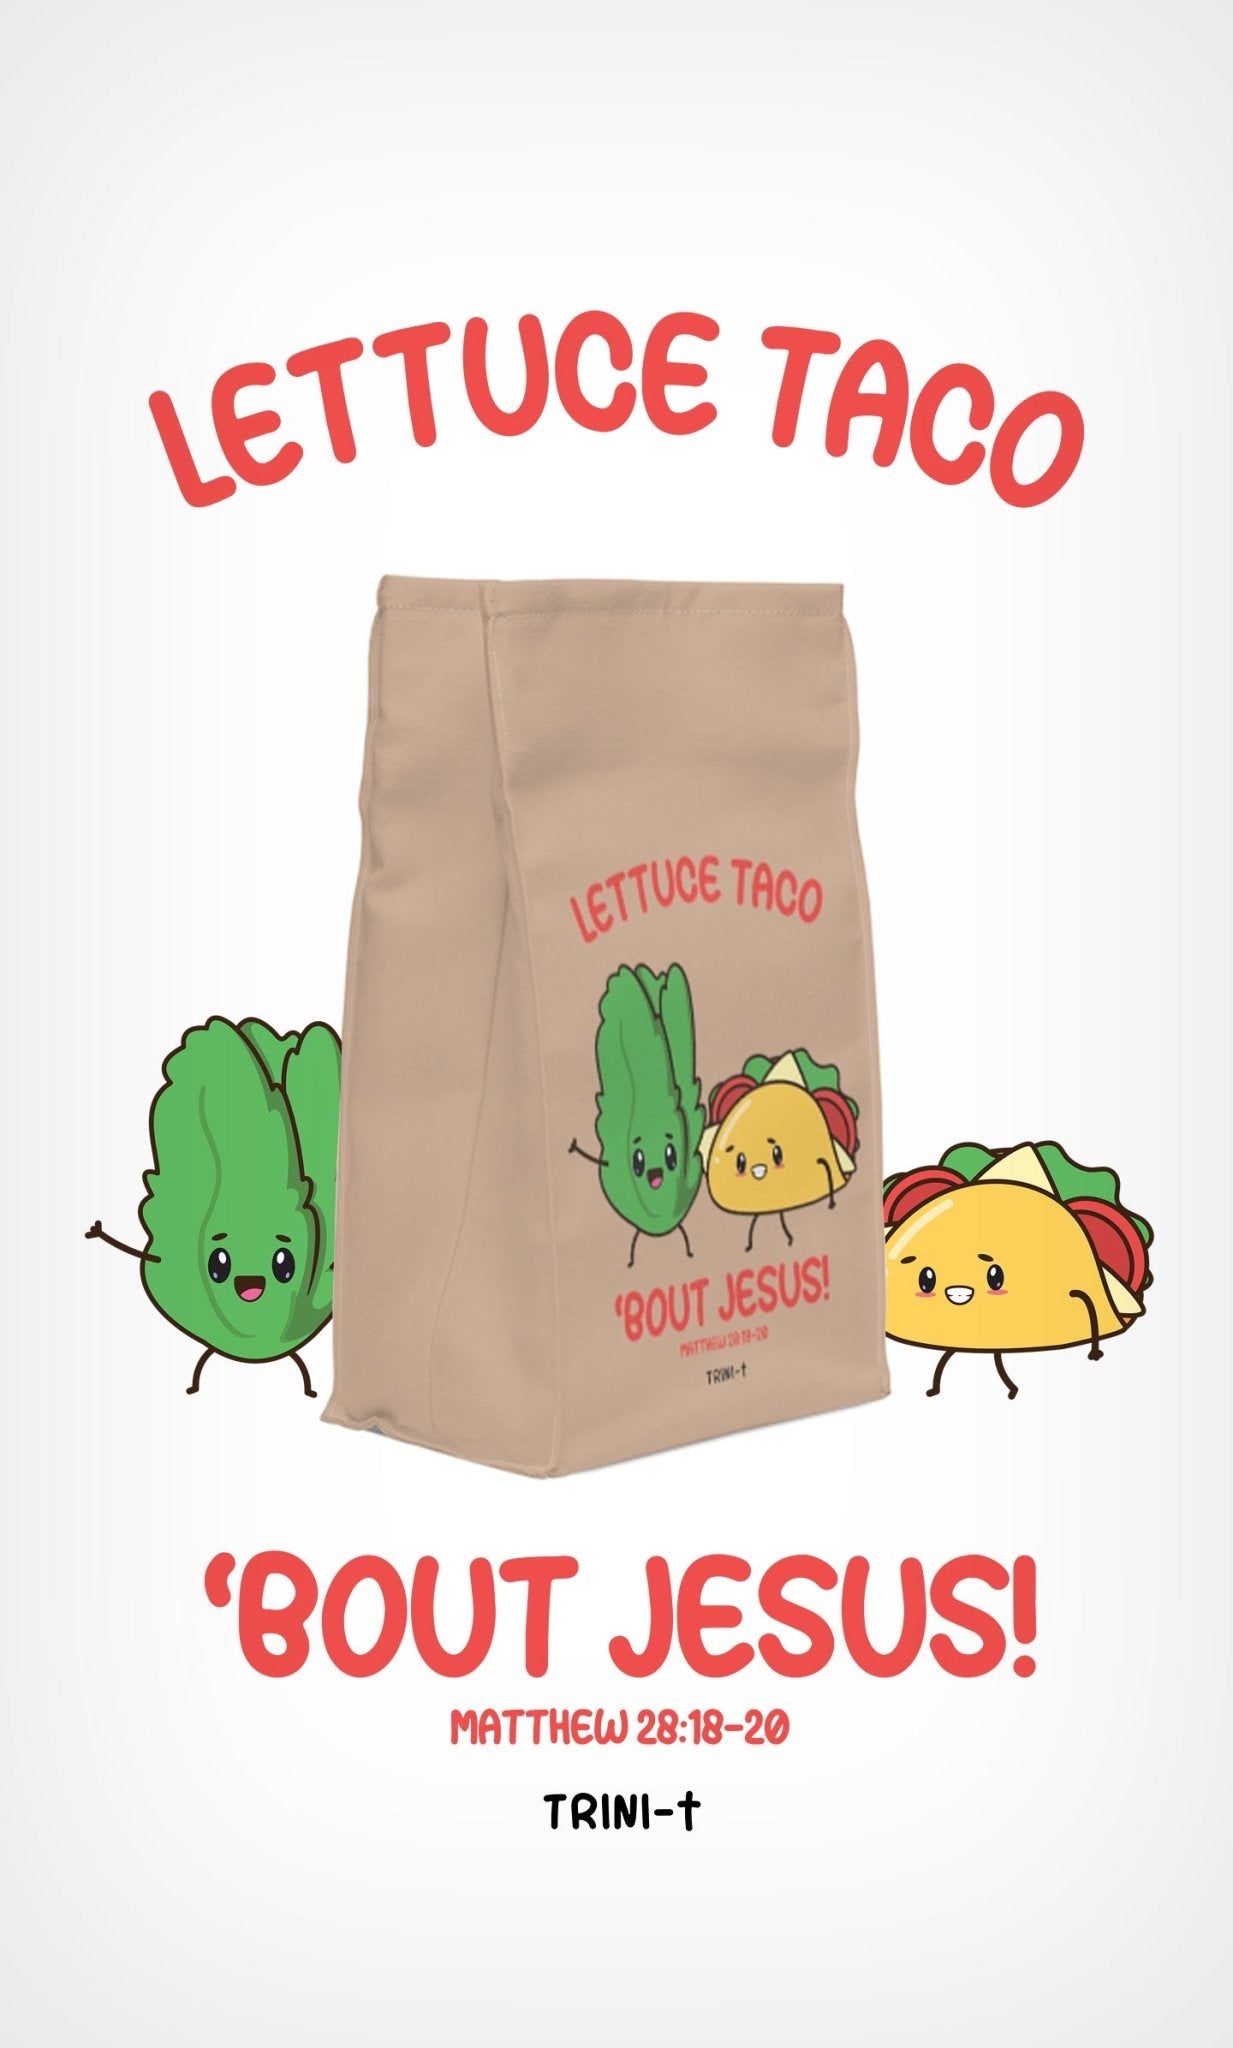 Lettuce Taco - Thermal Lunch Bag - Trini-T Ministries